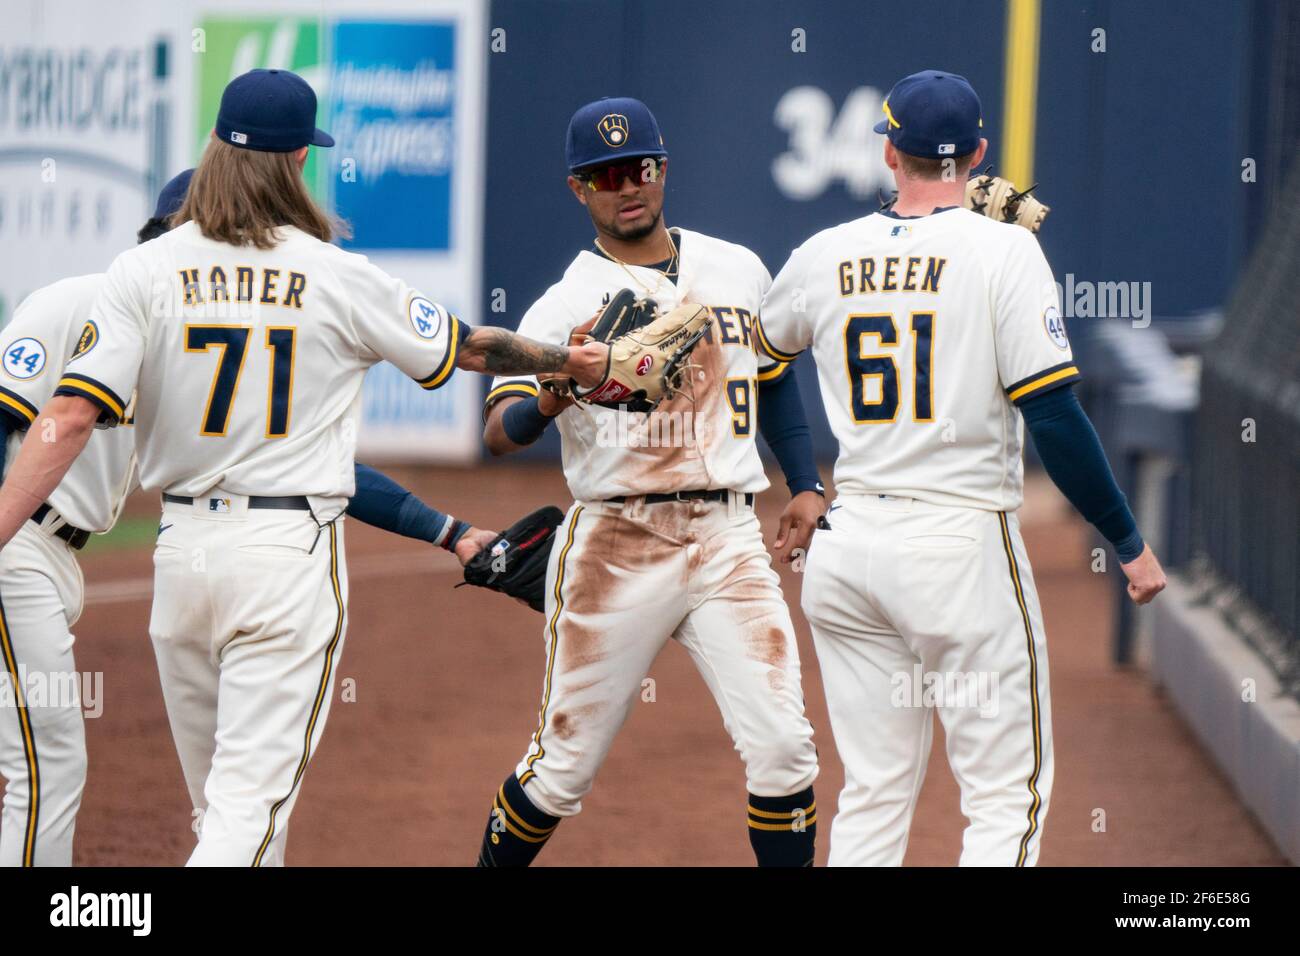 Milwaukee Brewers shortstop Freddy Zamora (94) is congratulated by  teammates during a spring training game against the Chicago White Sox,  Friday, March 26, 2021, in Phoenix, AZ. The White Sox defeated the